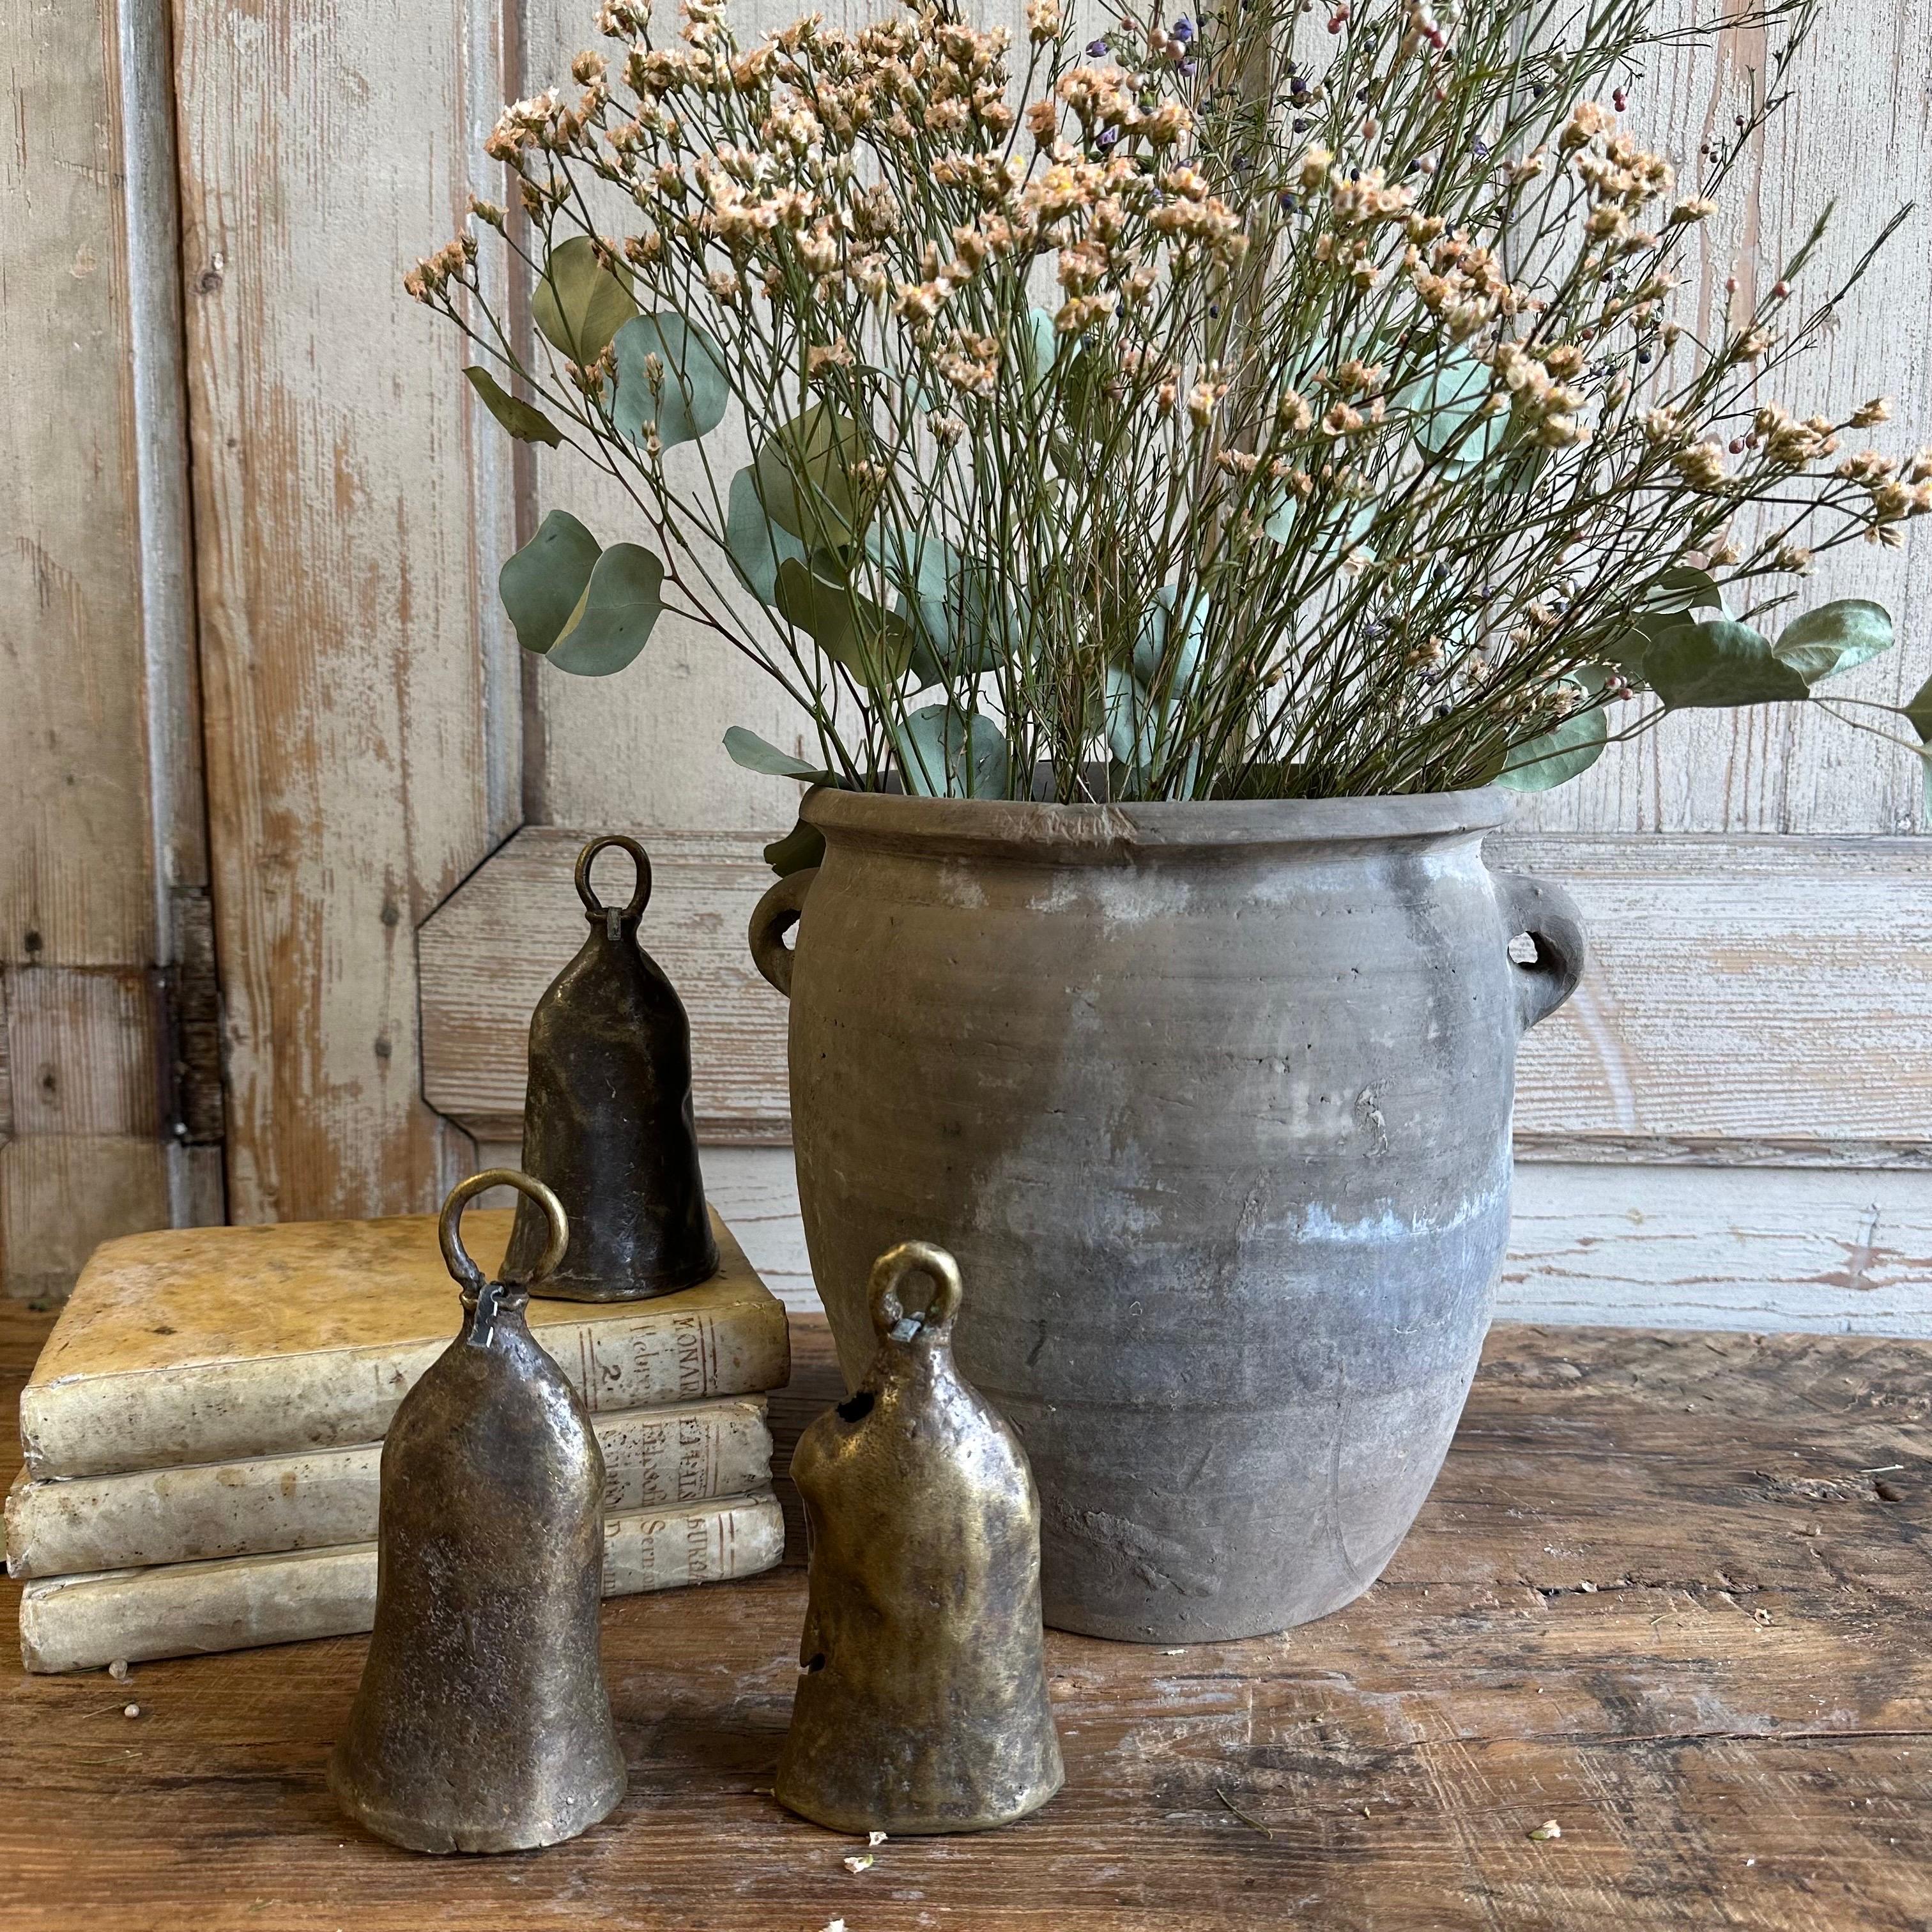 Beautiful weathered gray vintage clay pot that is beautifully colored and authentically worn. The surface of the pot and handle are peeling in places, revealing the original clay below. These qualities give the pot a lived-in appearance and will